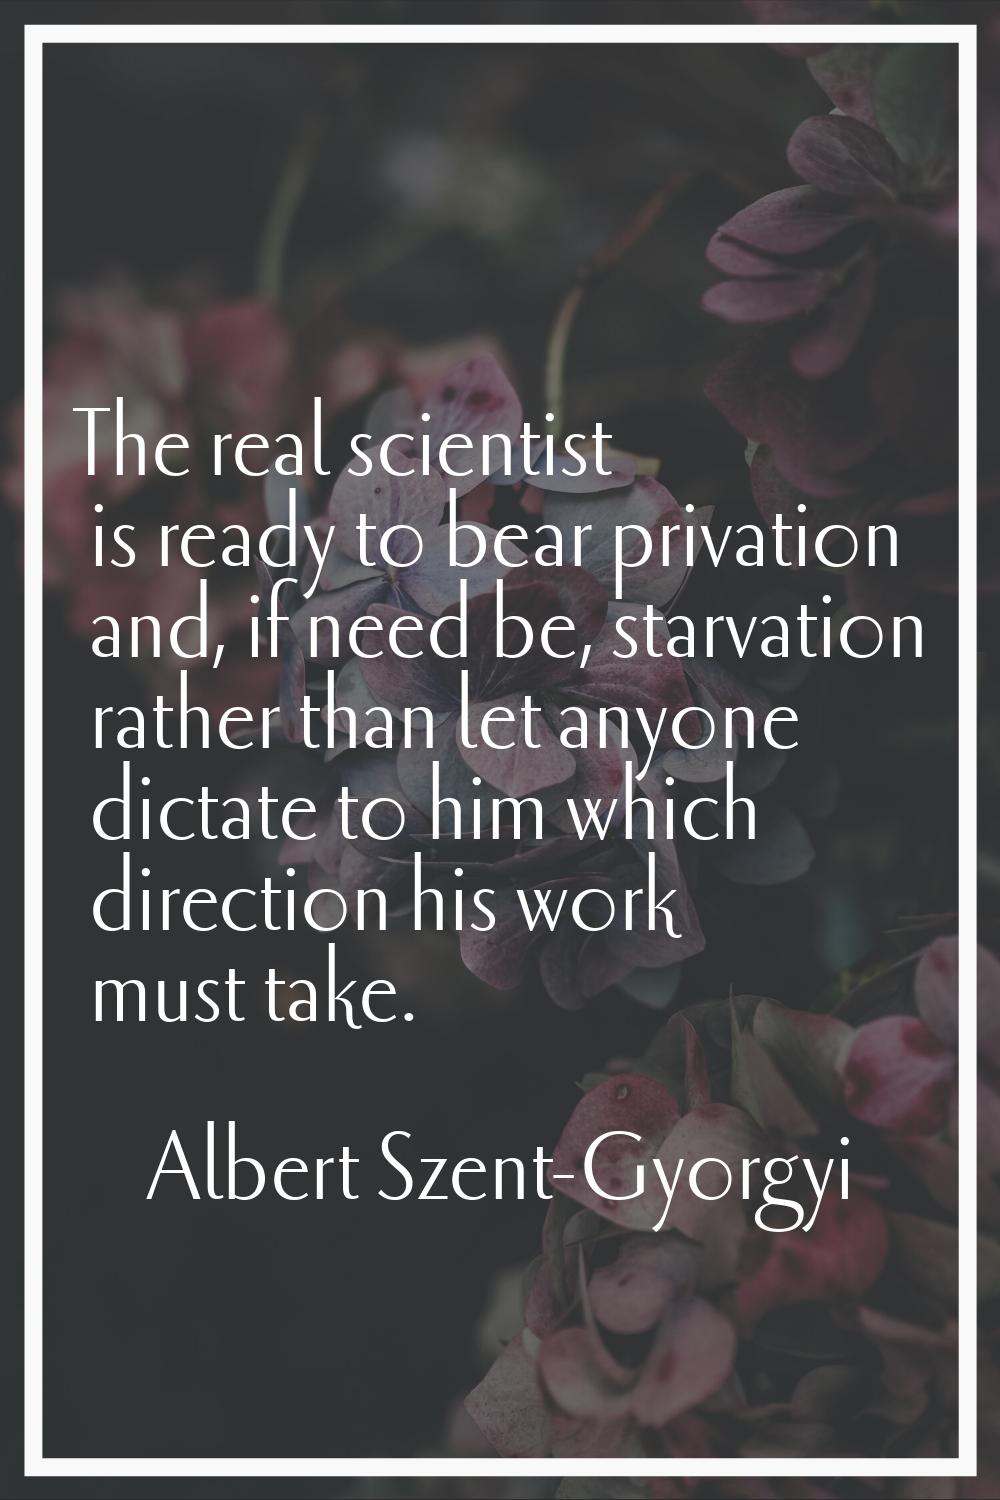 The real scientist is ready to bear privation and, if need be, starvation rather than let anyone di